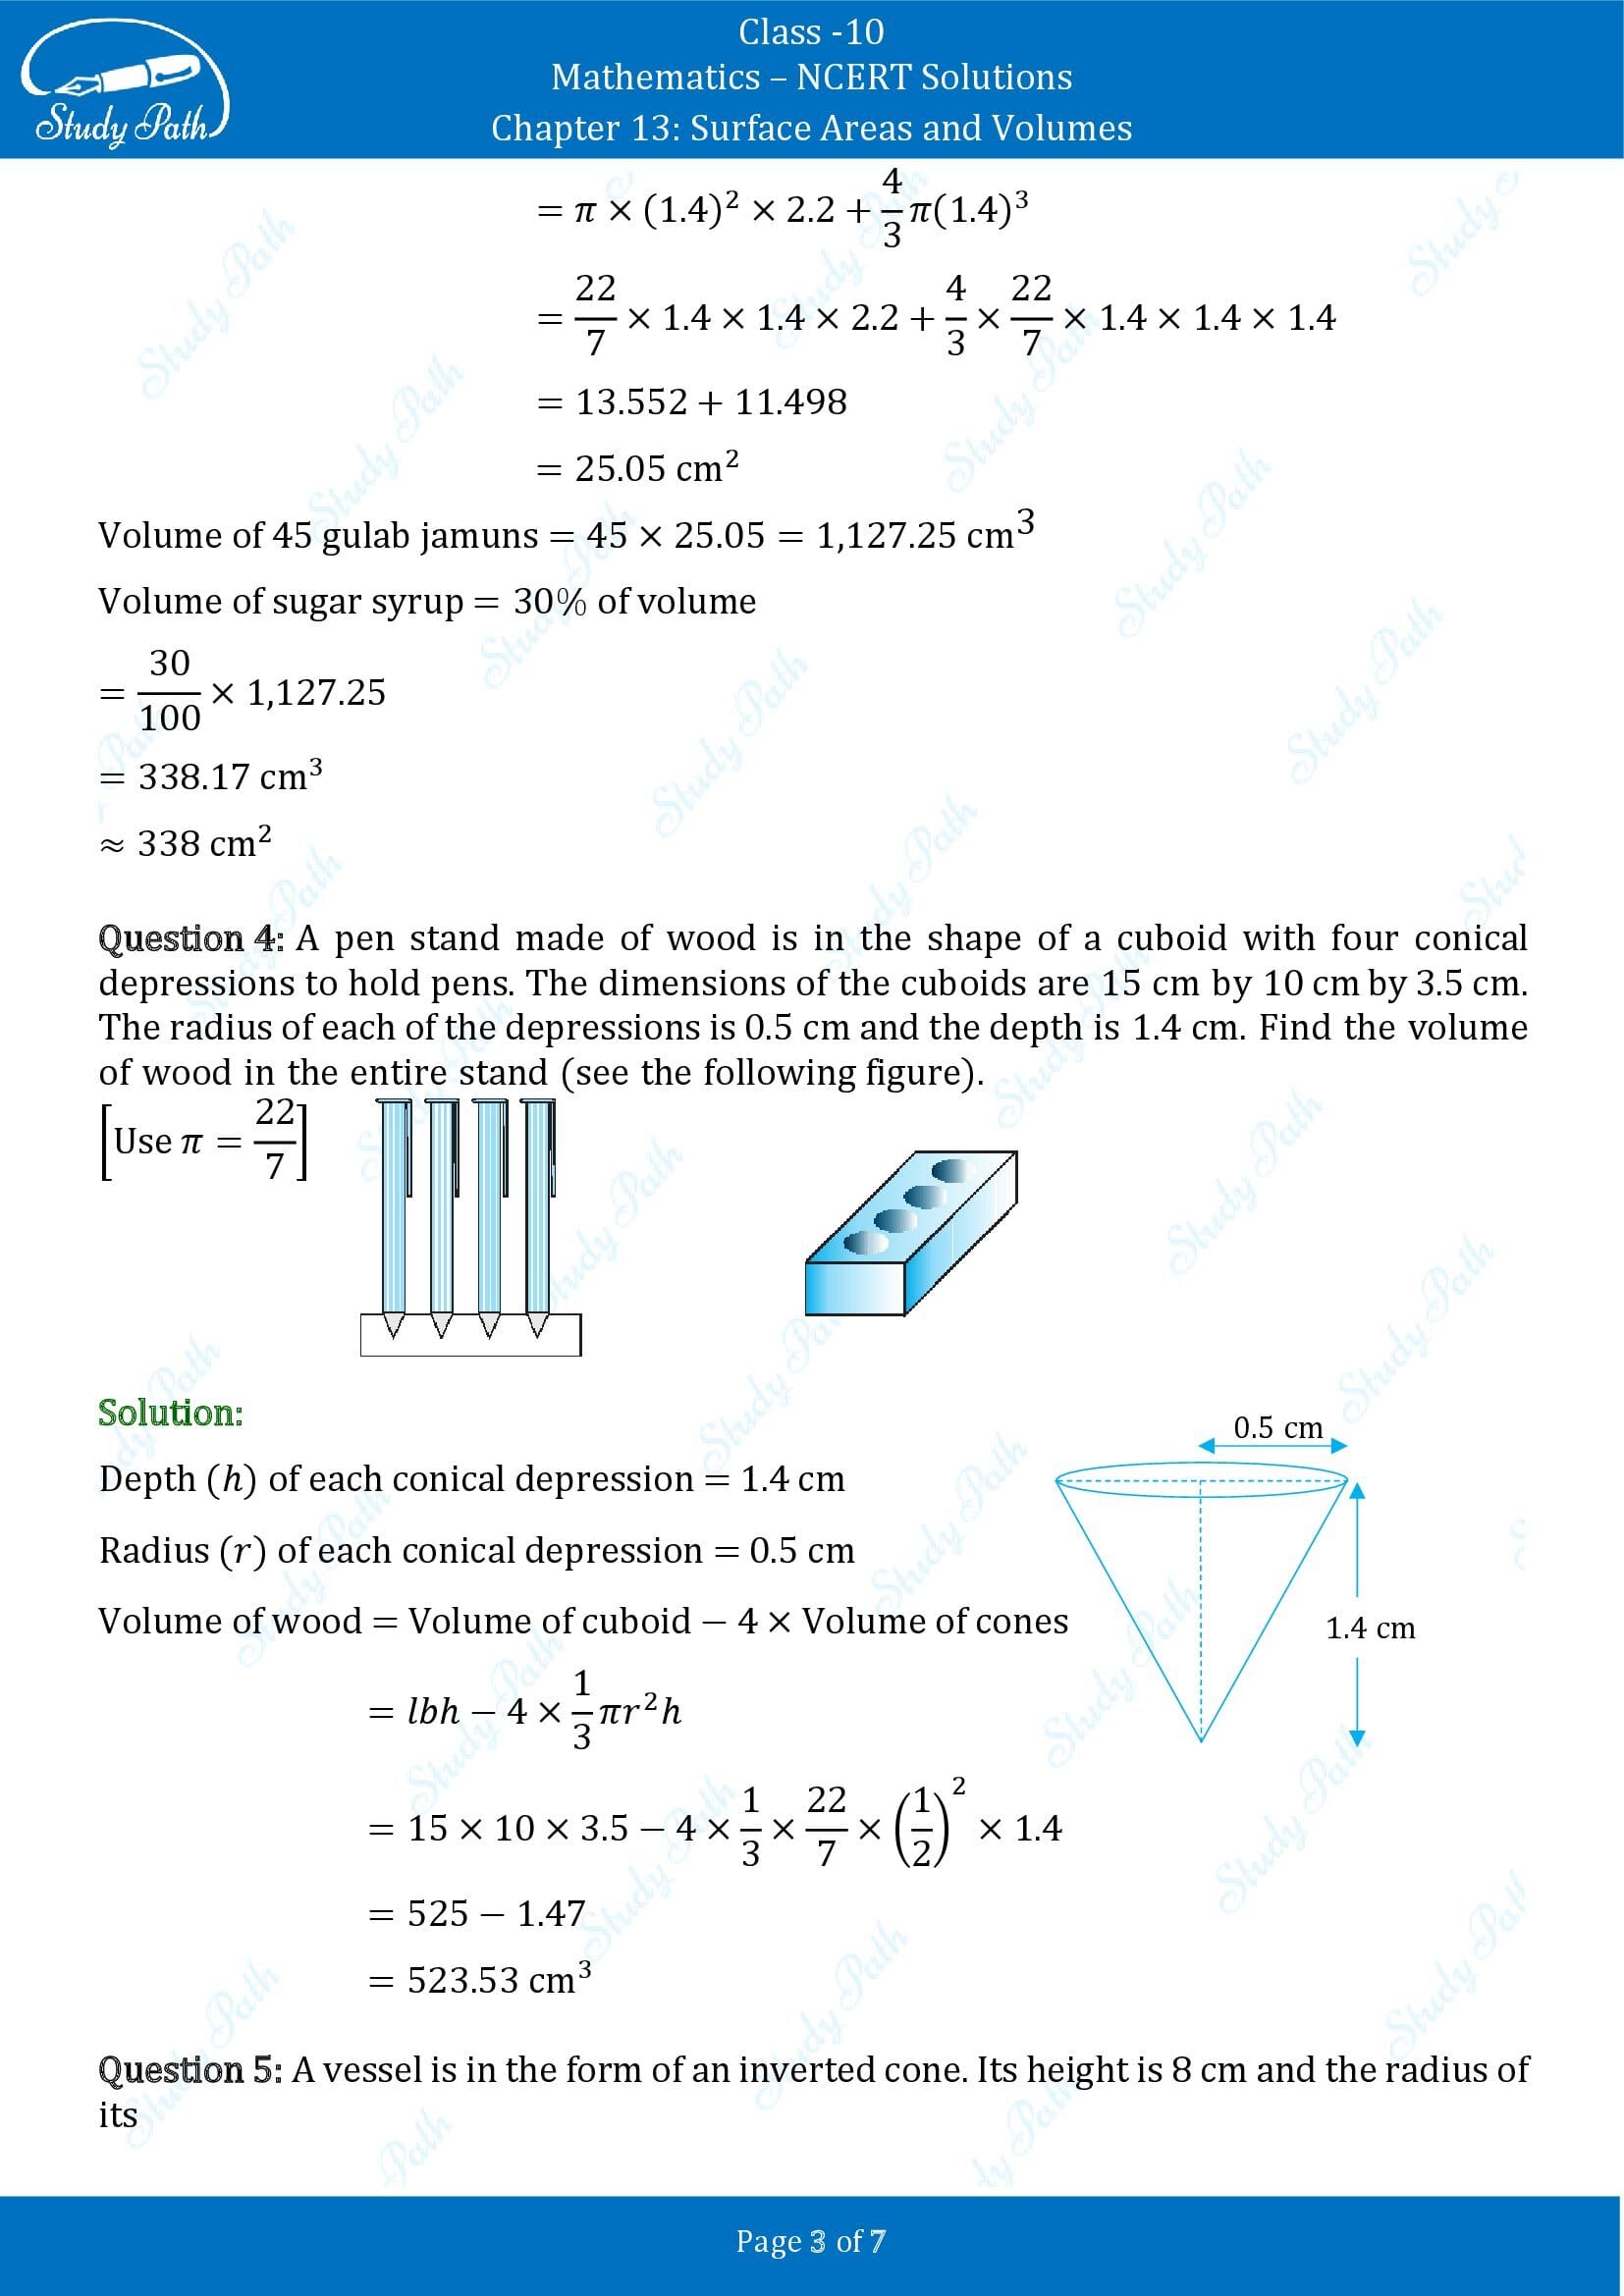 NCERT Solutions for Class 10 Maths Chapter 13 Surface Areas and Volumes Exercise 13.2 00003